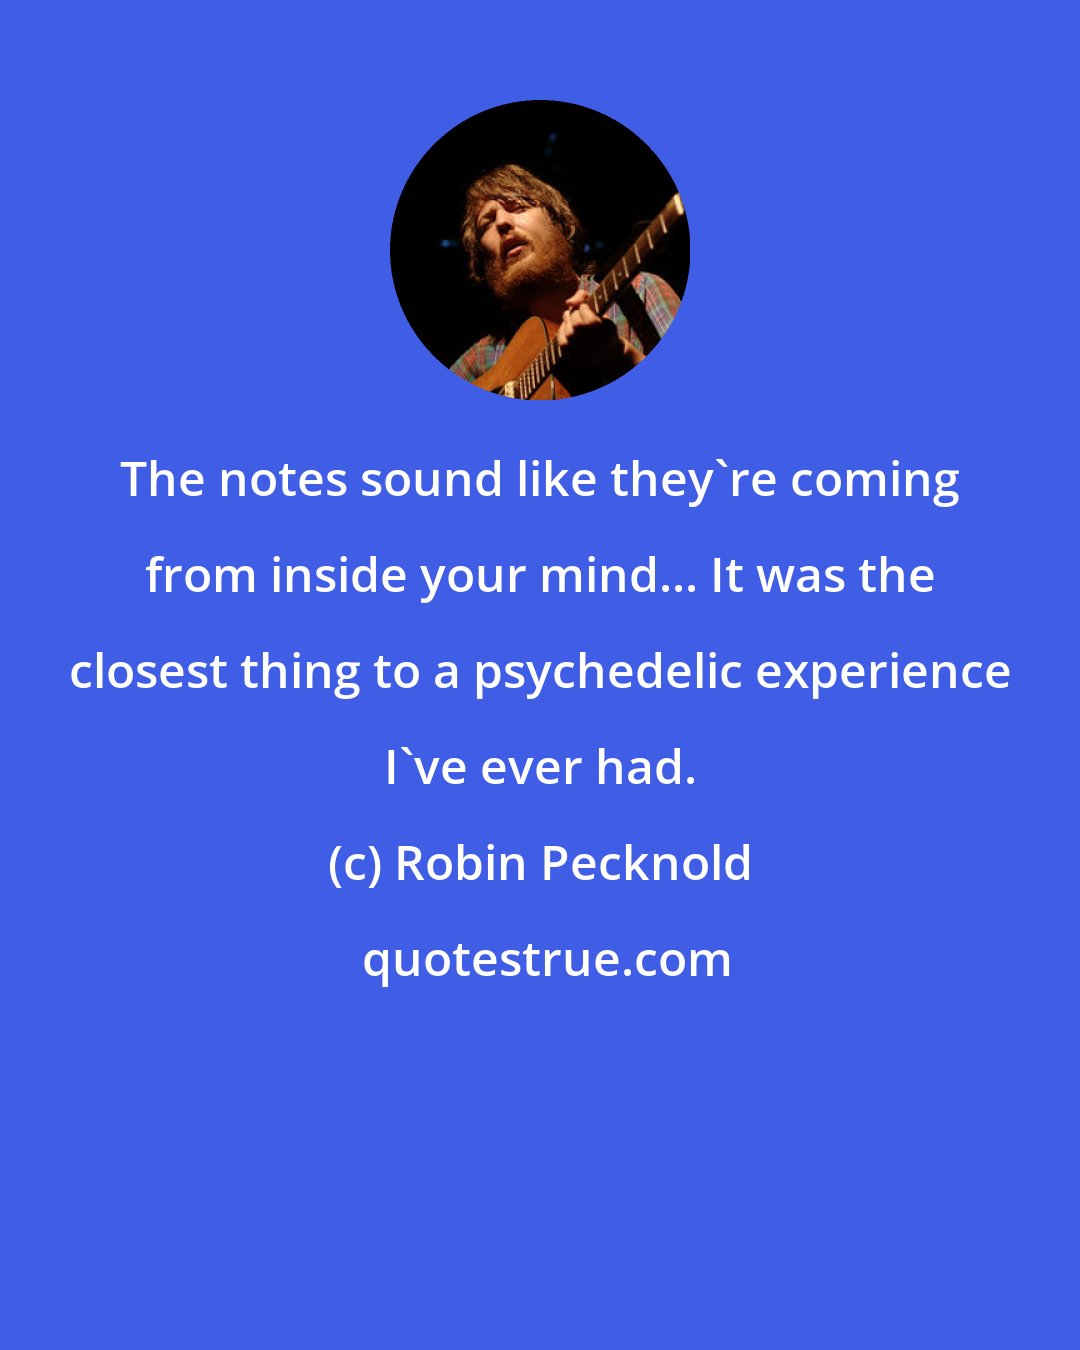 Robin Pecknold: The notes sound like they're coming from inside your mind... It was the closest thing to a psychedelic experience I've ever had.